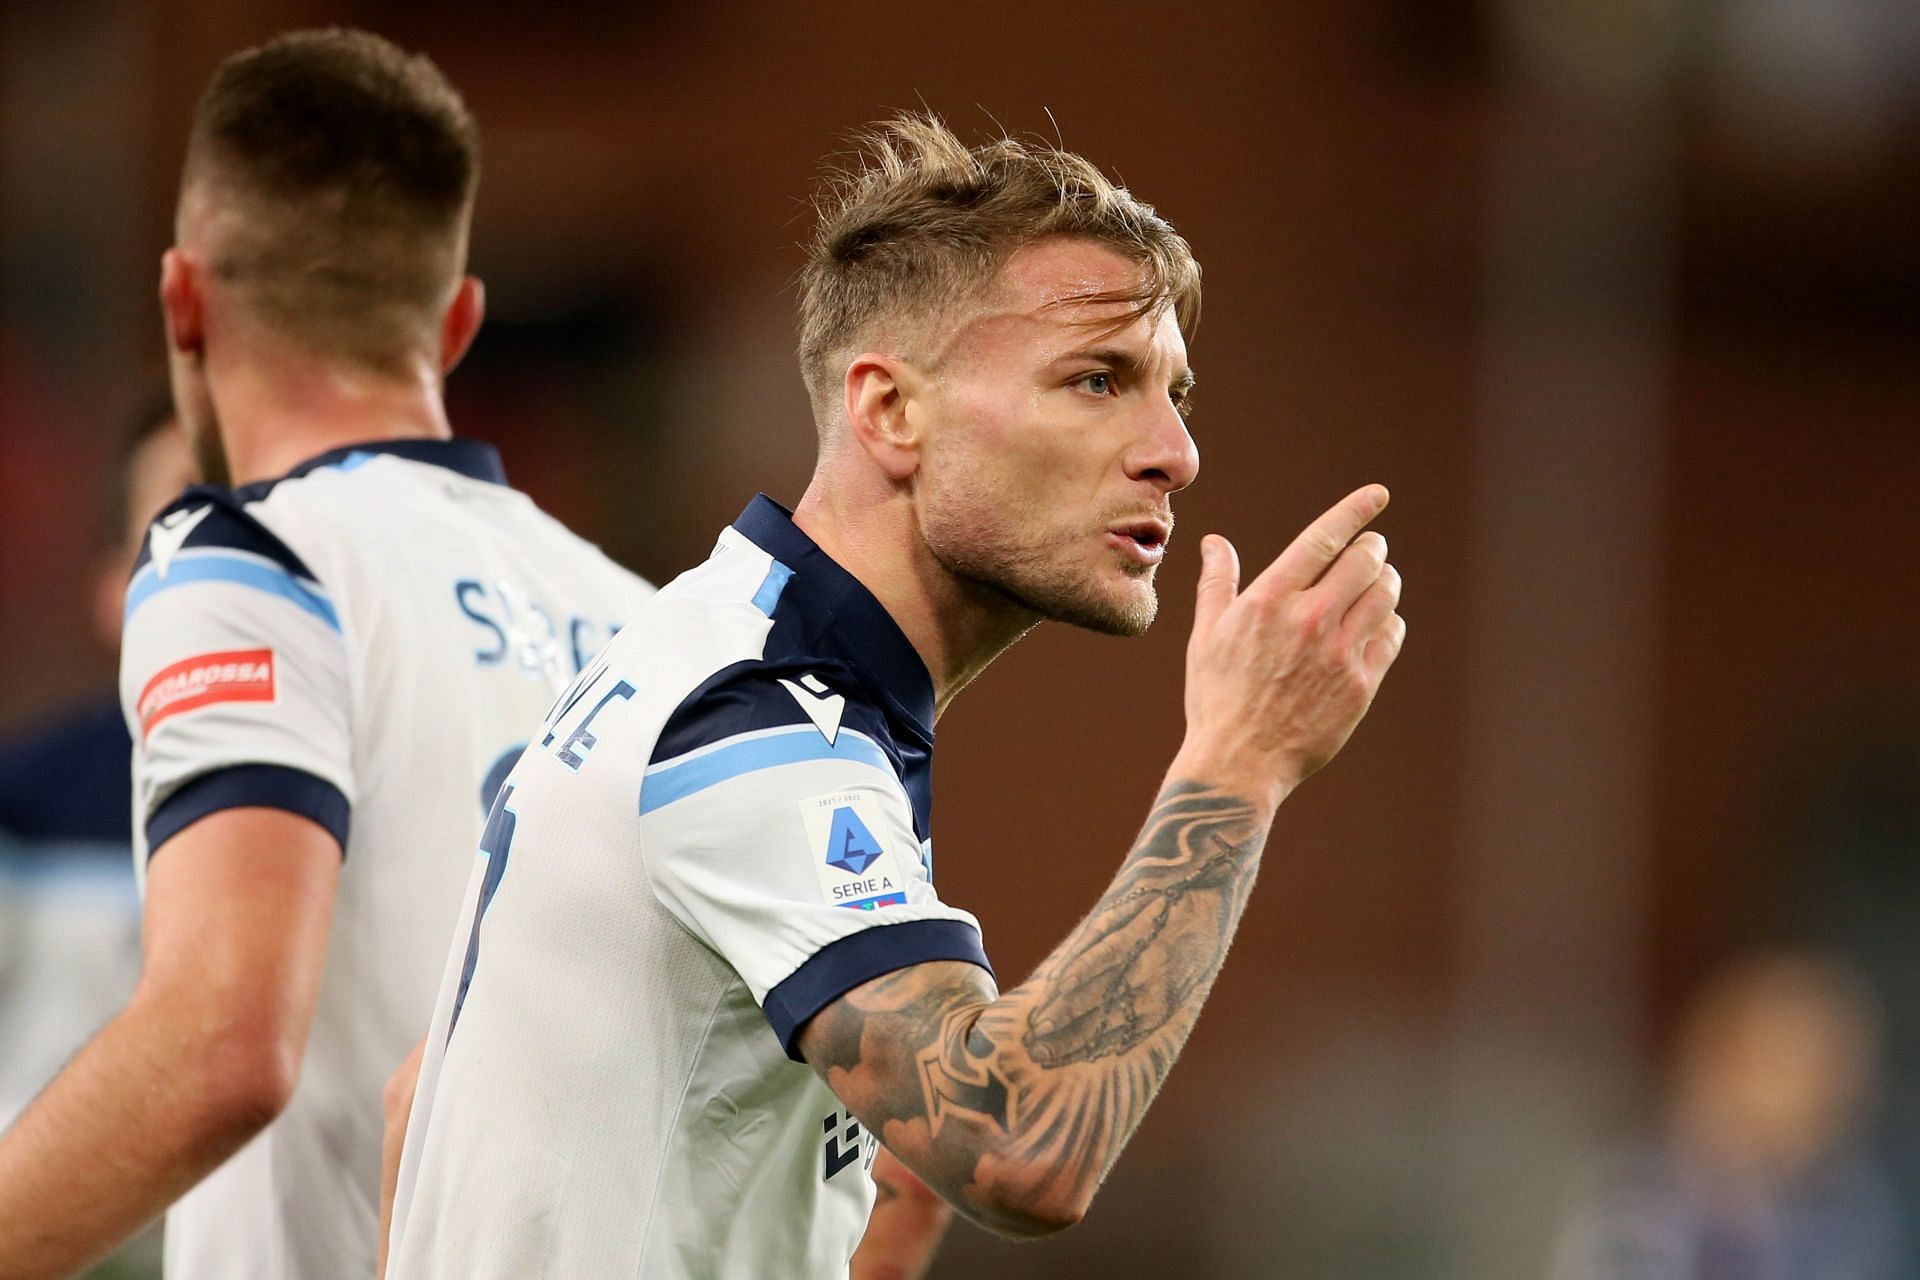 The Lazio striker is still going strong in Serie A